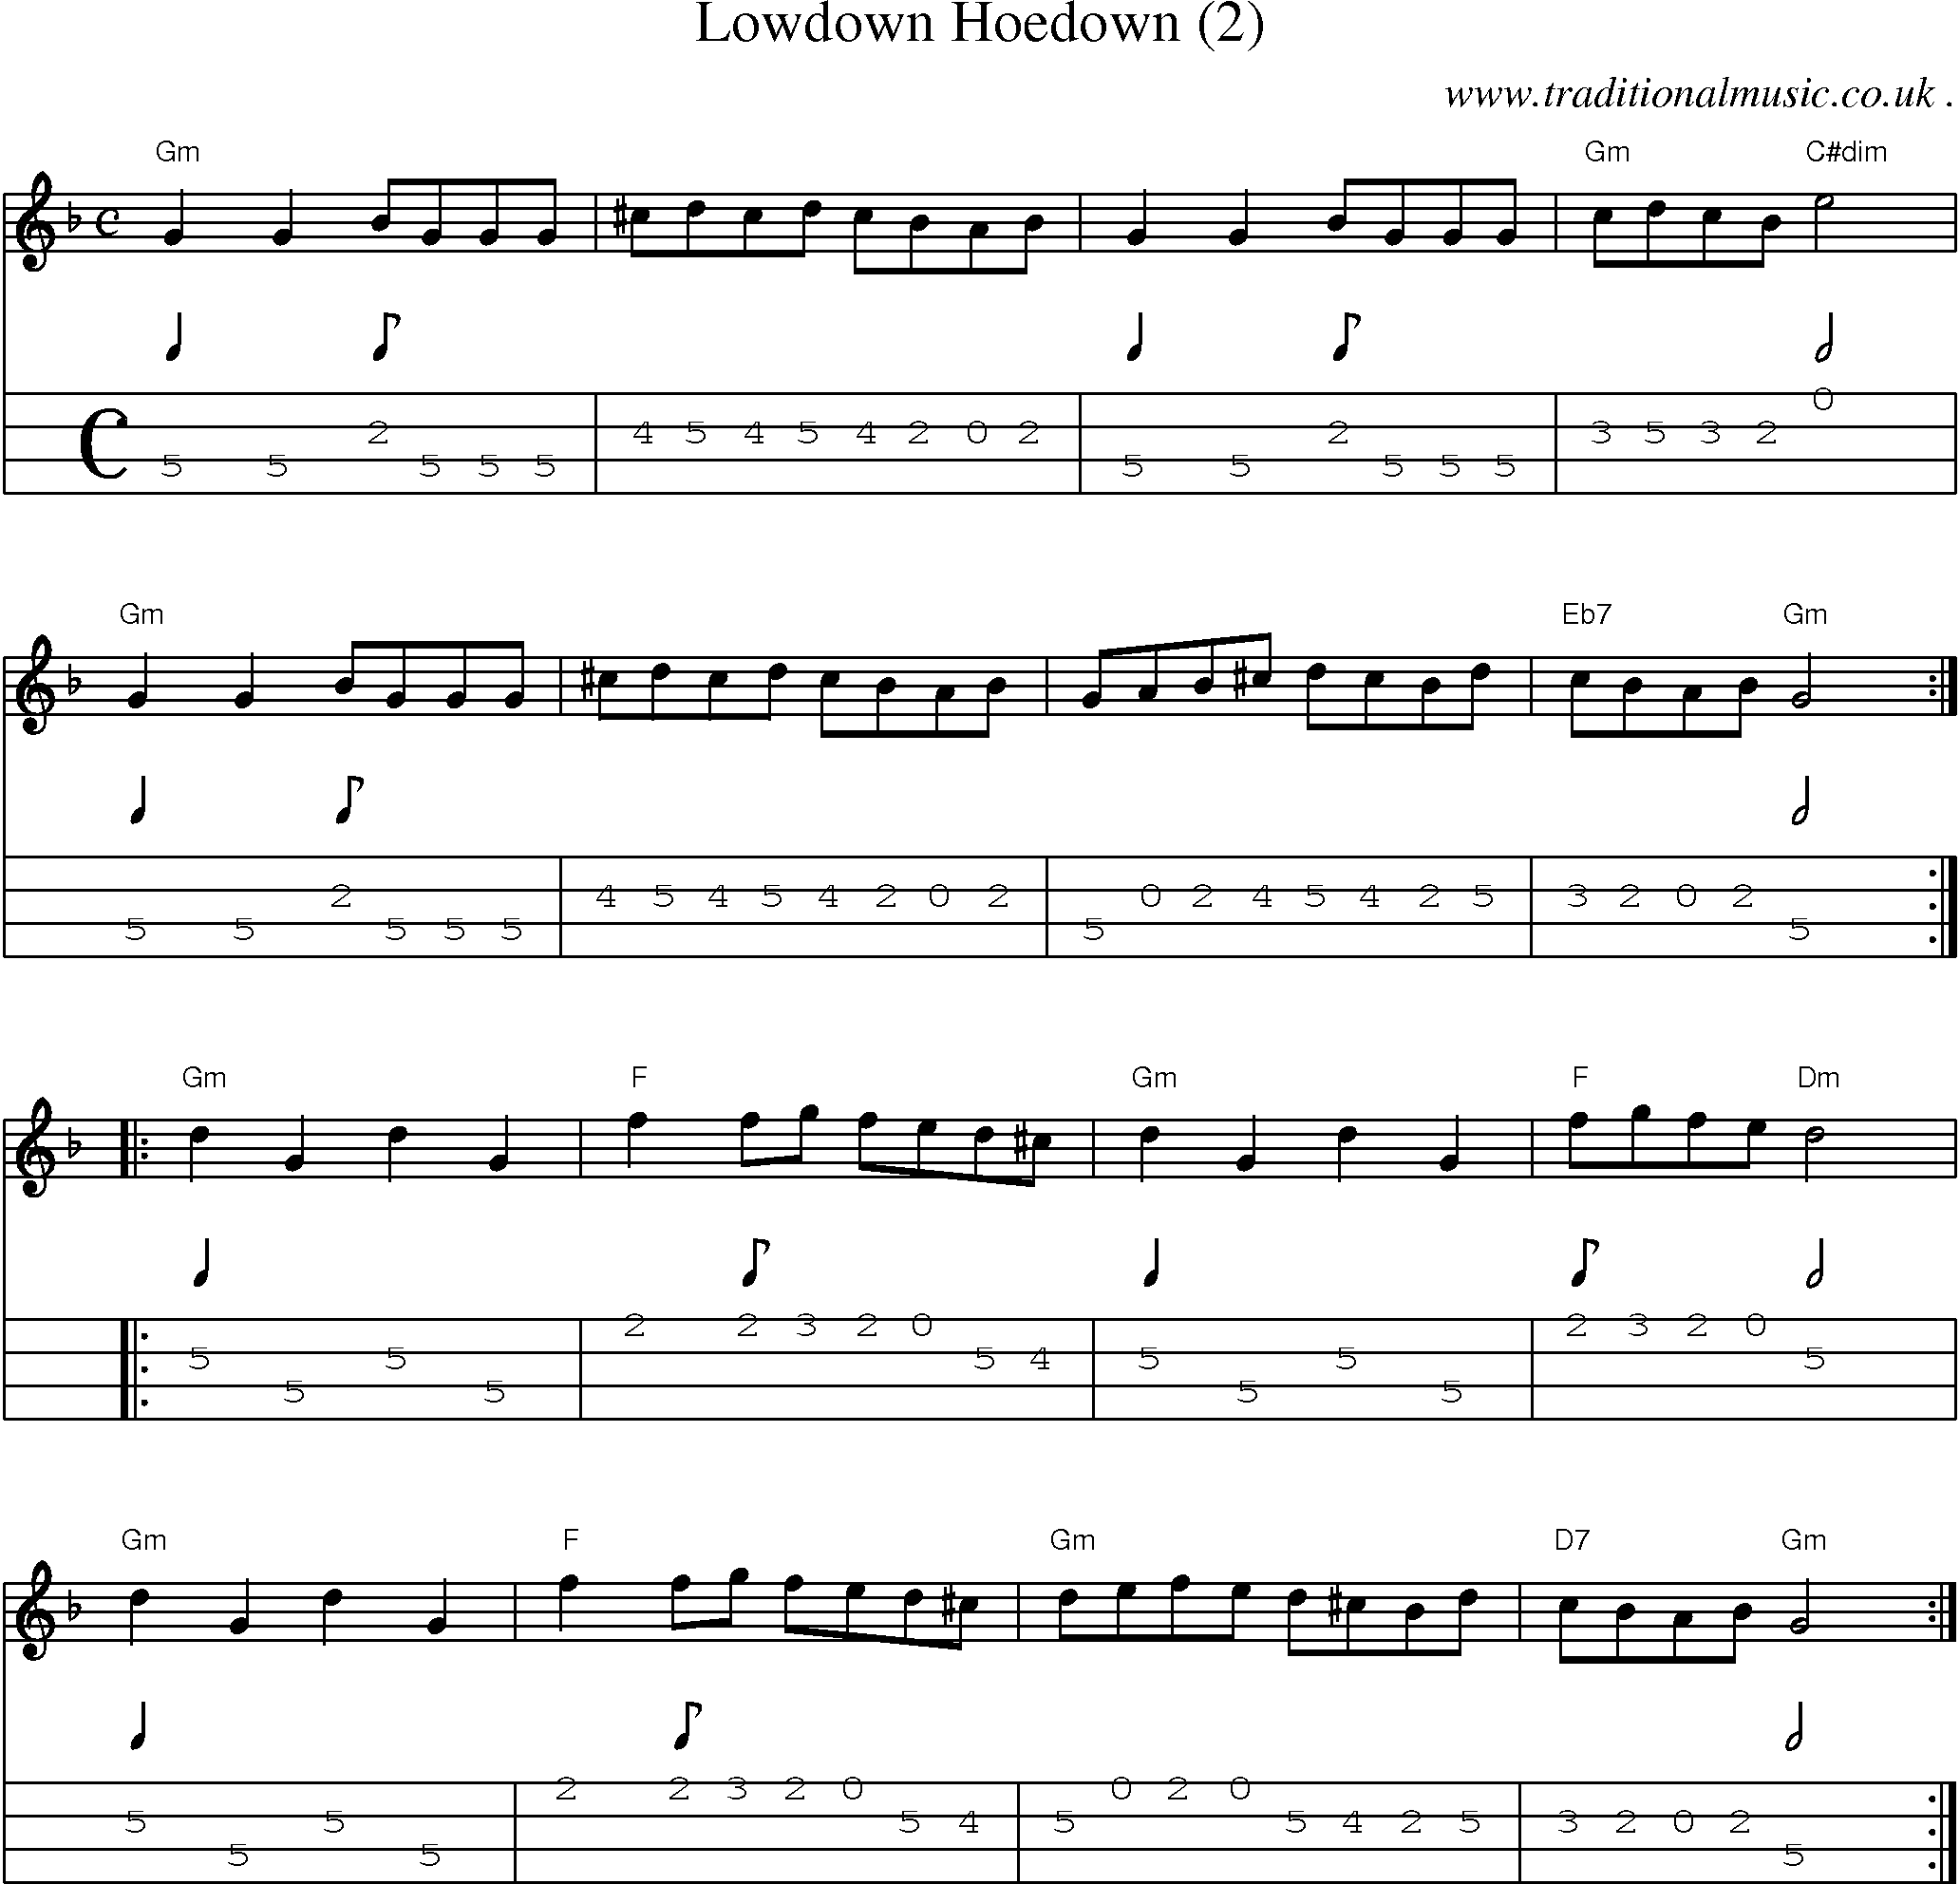 Music Score and Mandolin Tabs for Lowdown Hoedown (2)